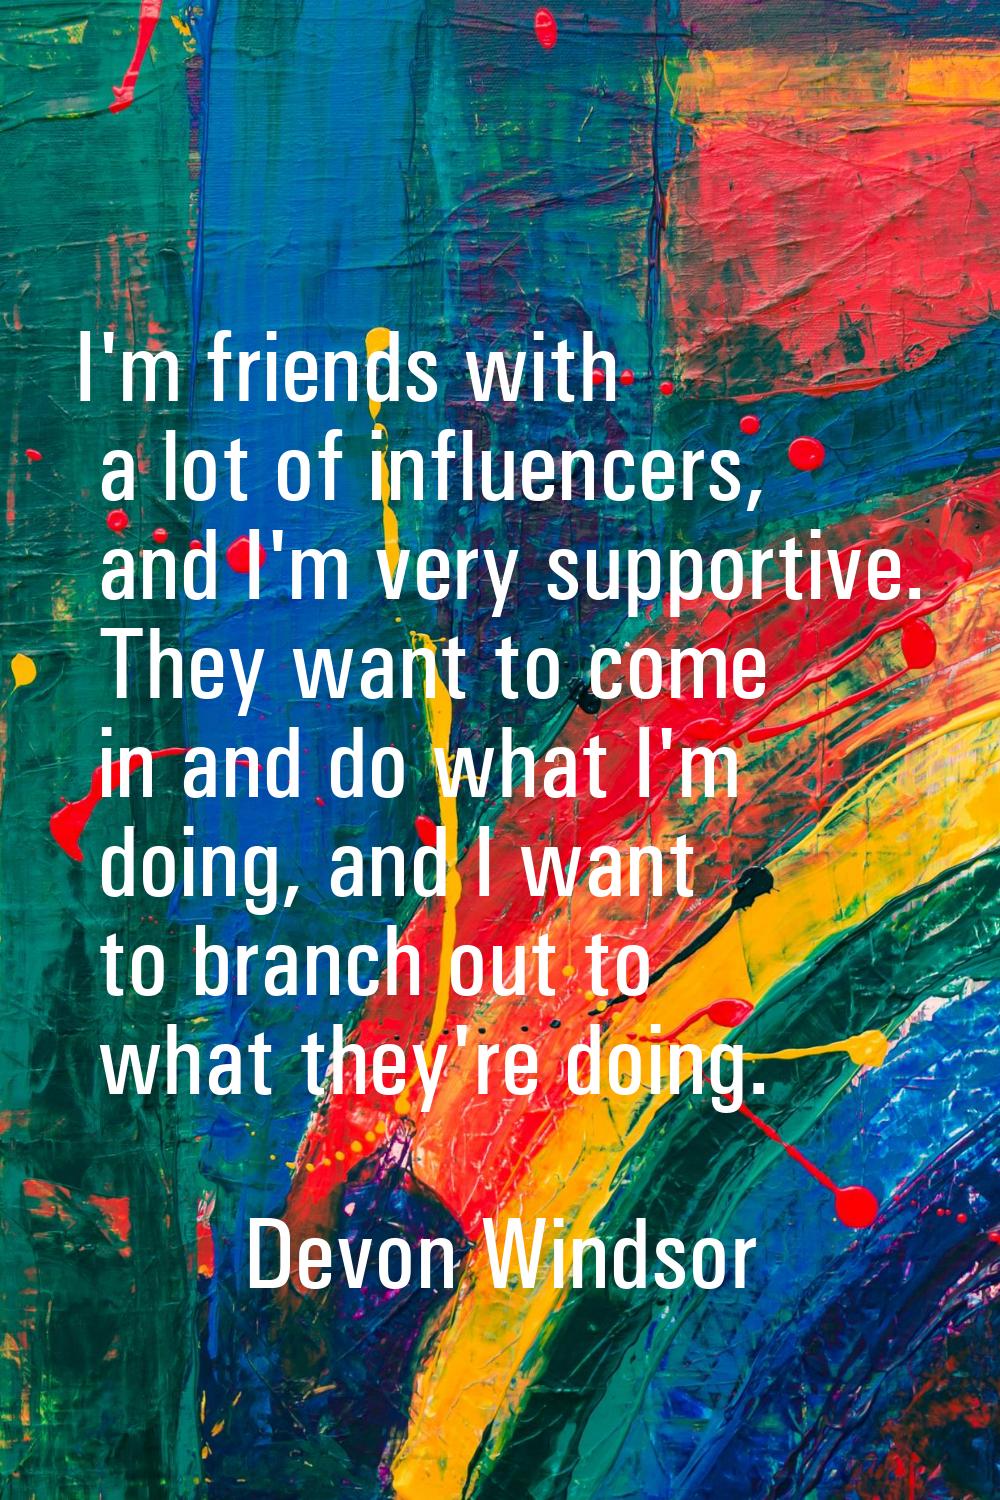 I'm friends with a lot of influencers, and I'm very supportive. They want to come in and do what I'